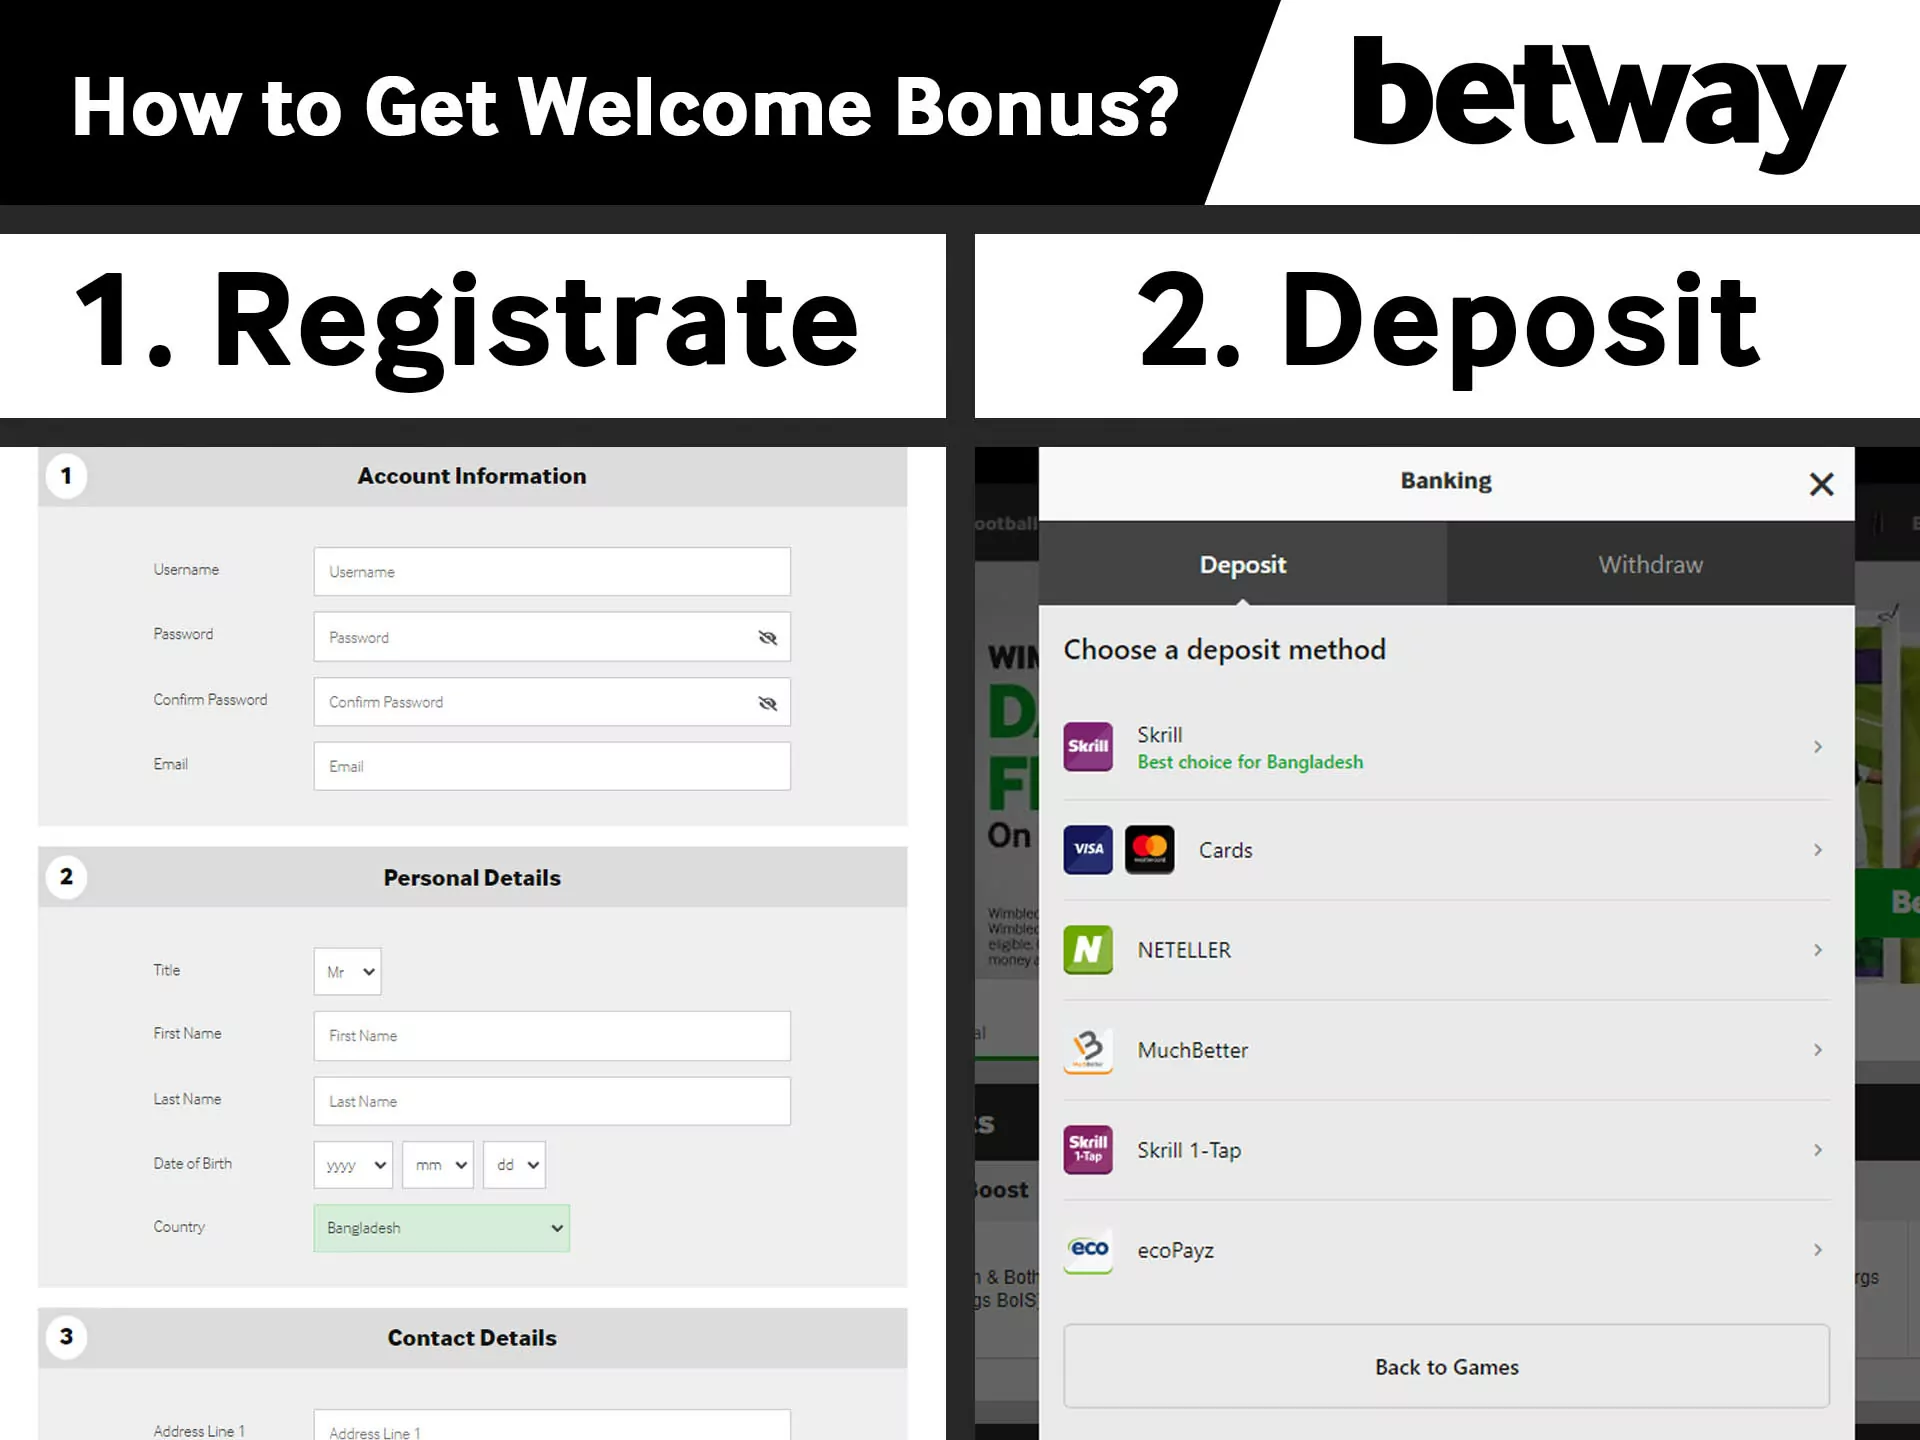 After registration at Betway you need to deposit and after that you get your welcome bonus.